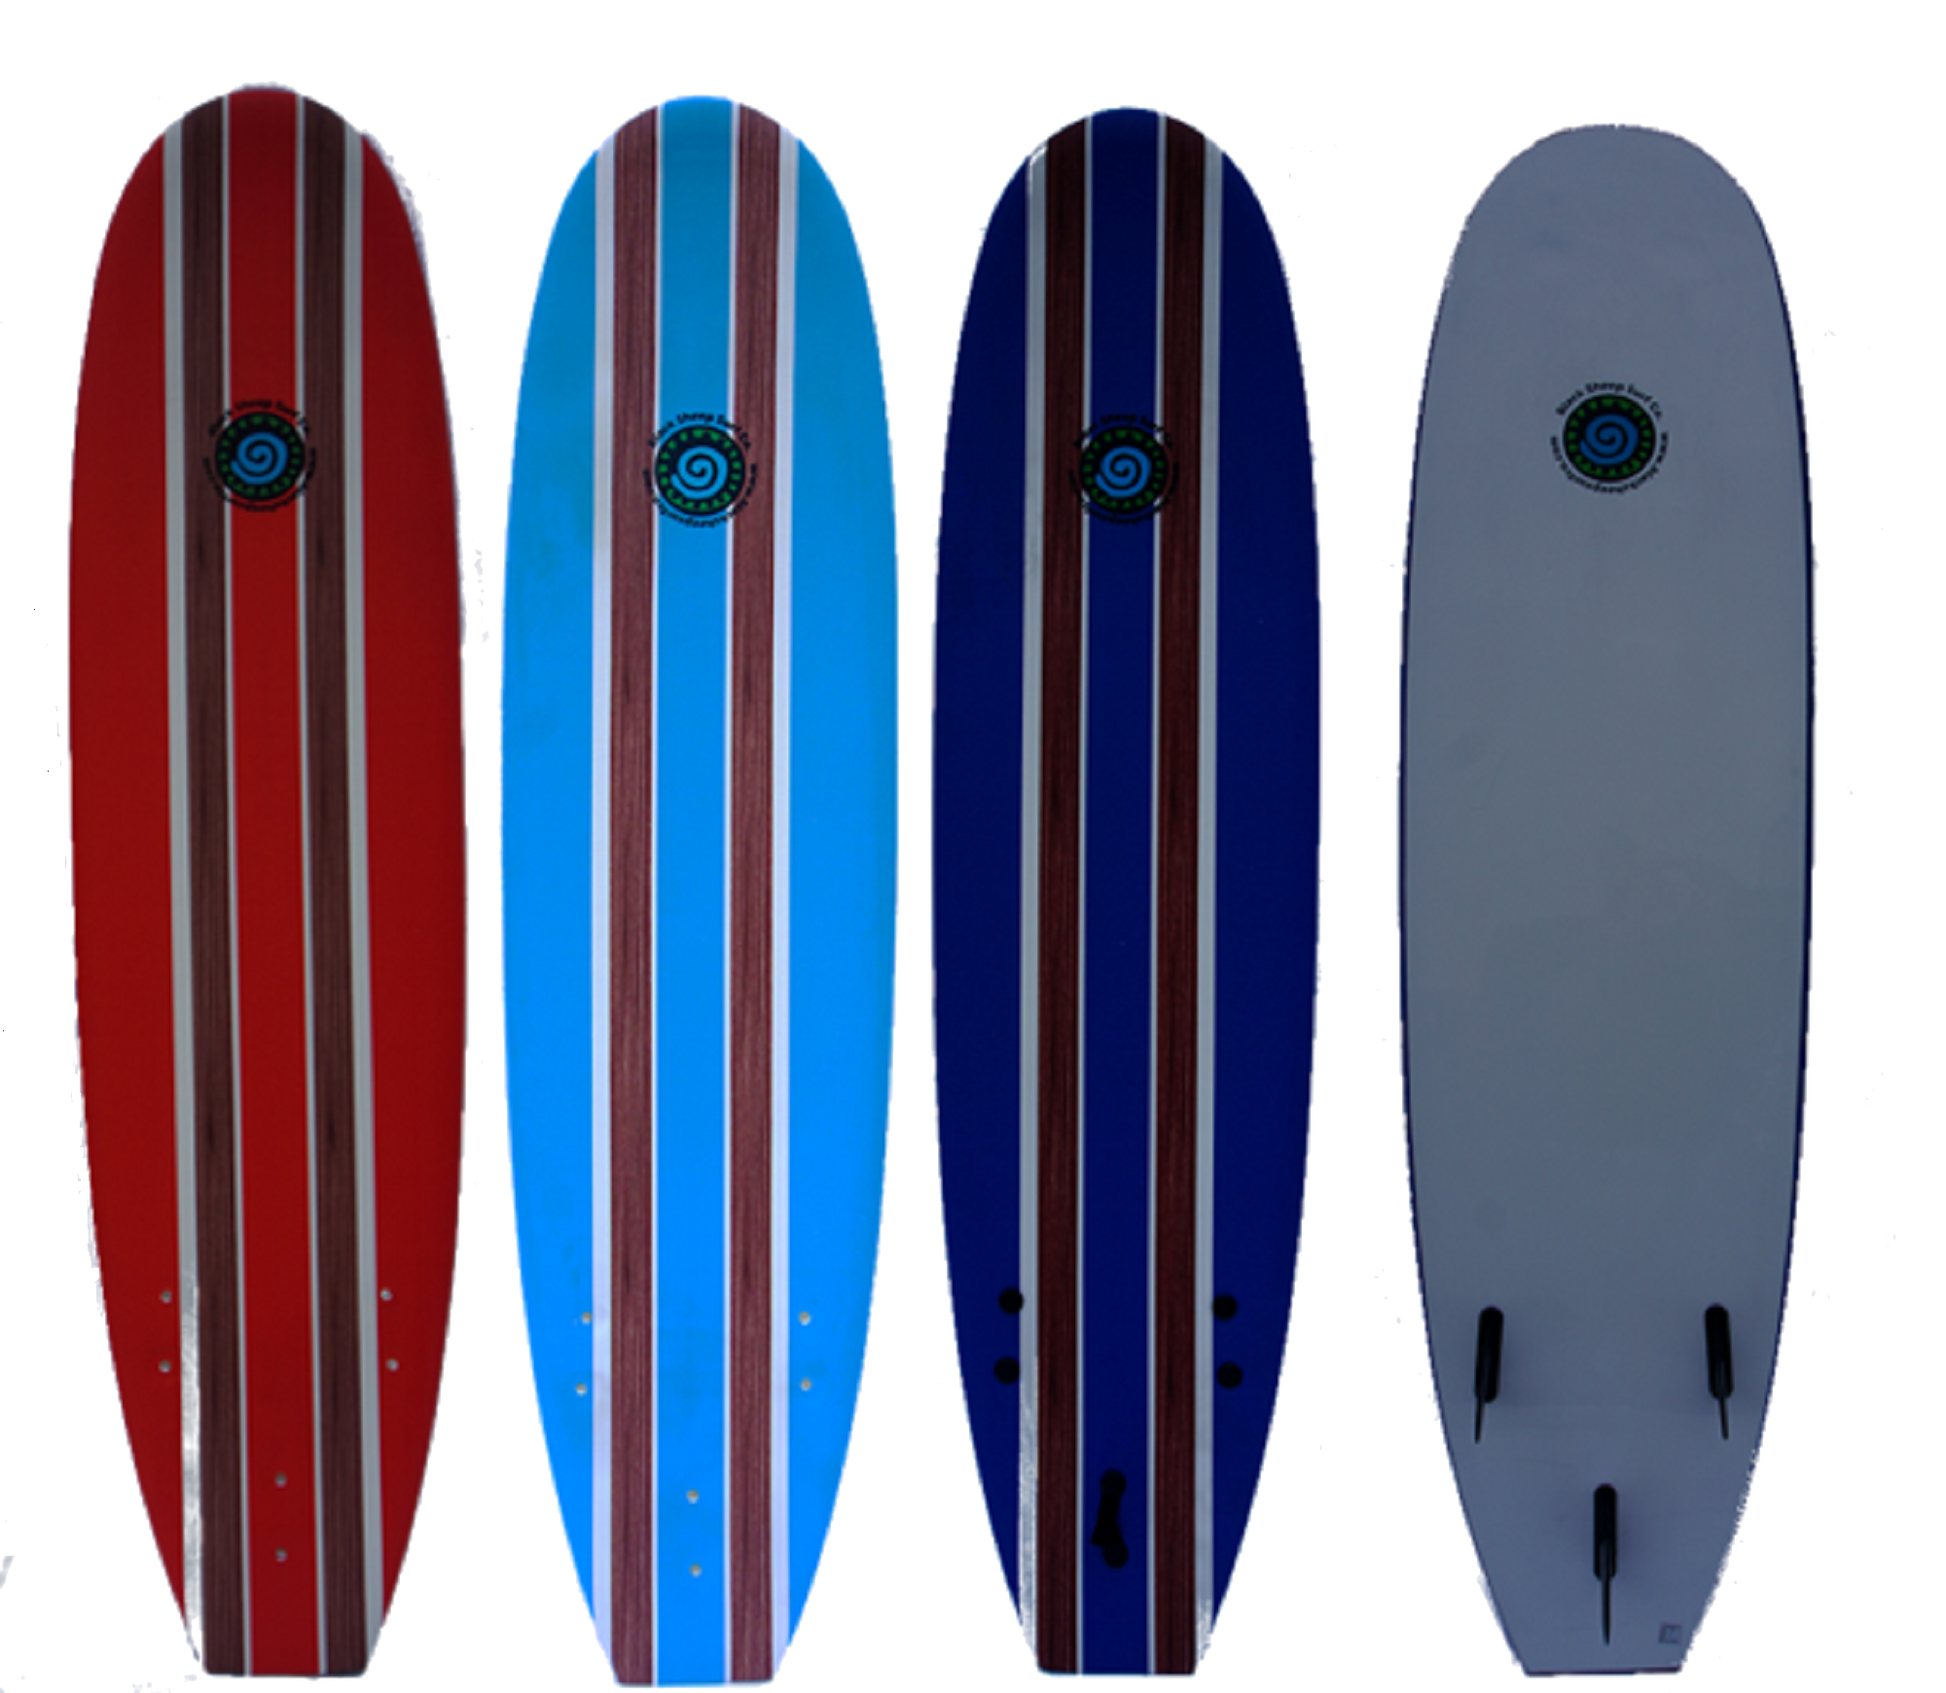 black-sheep-surf-co-8ft-colour-options-variants-softboard-surfboard-galway-ireland-surfing